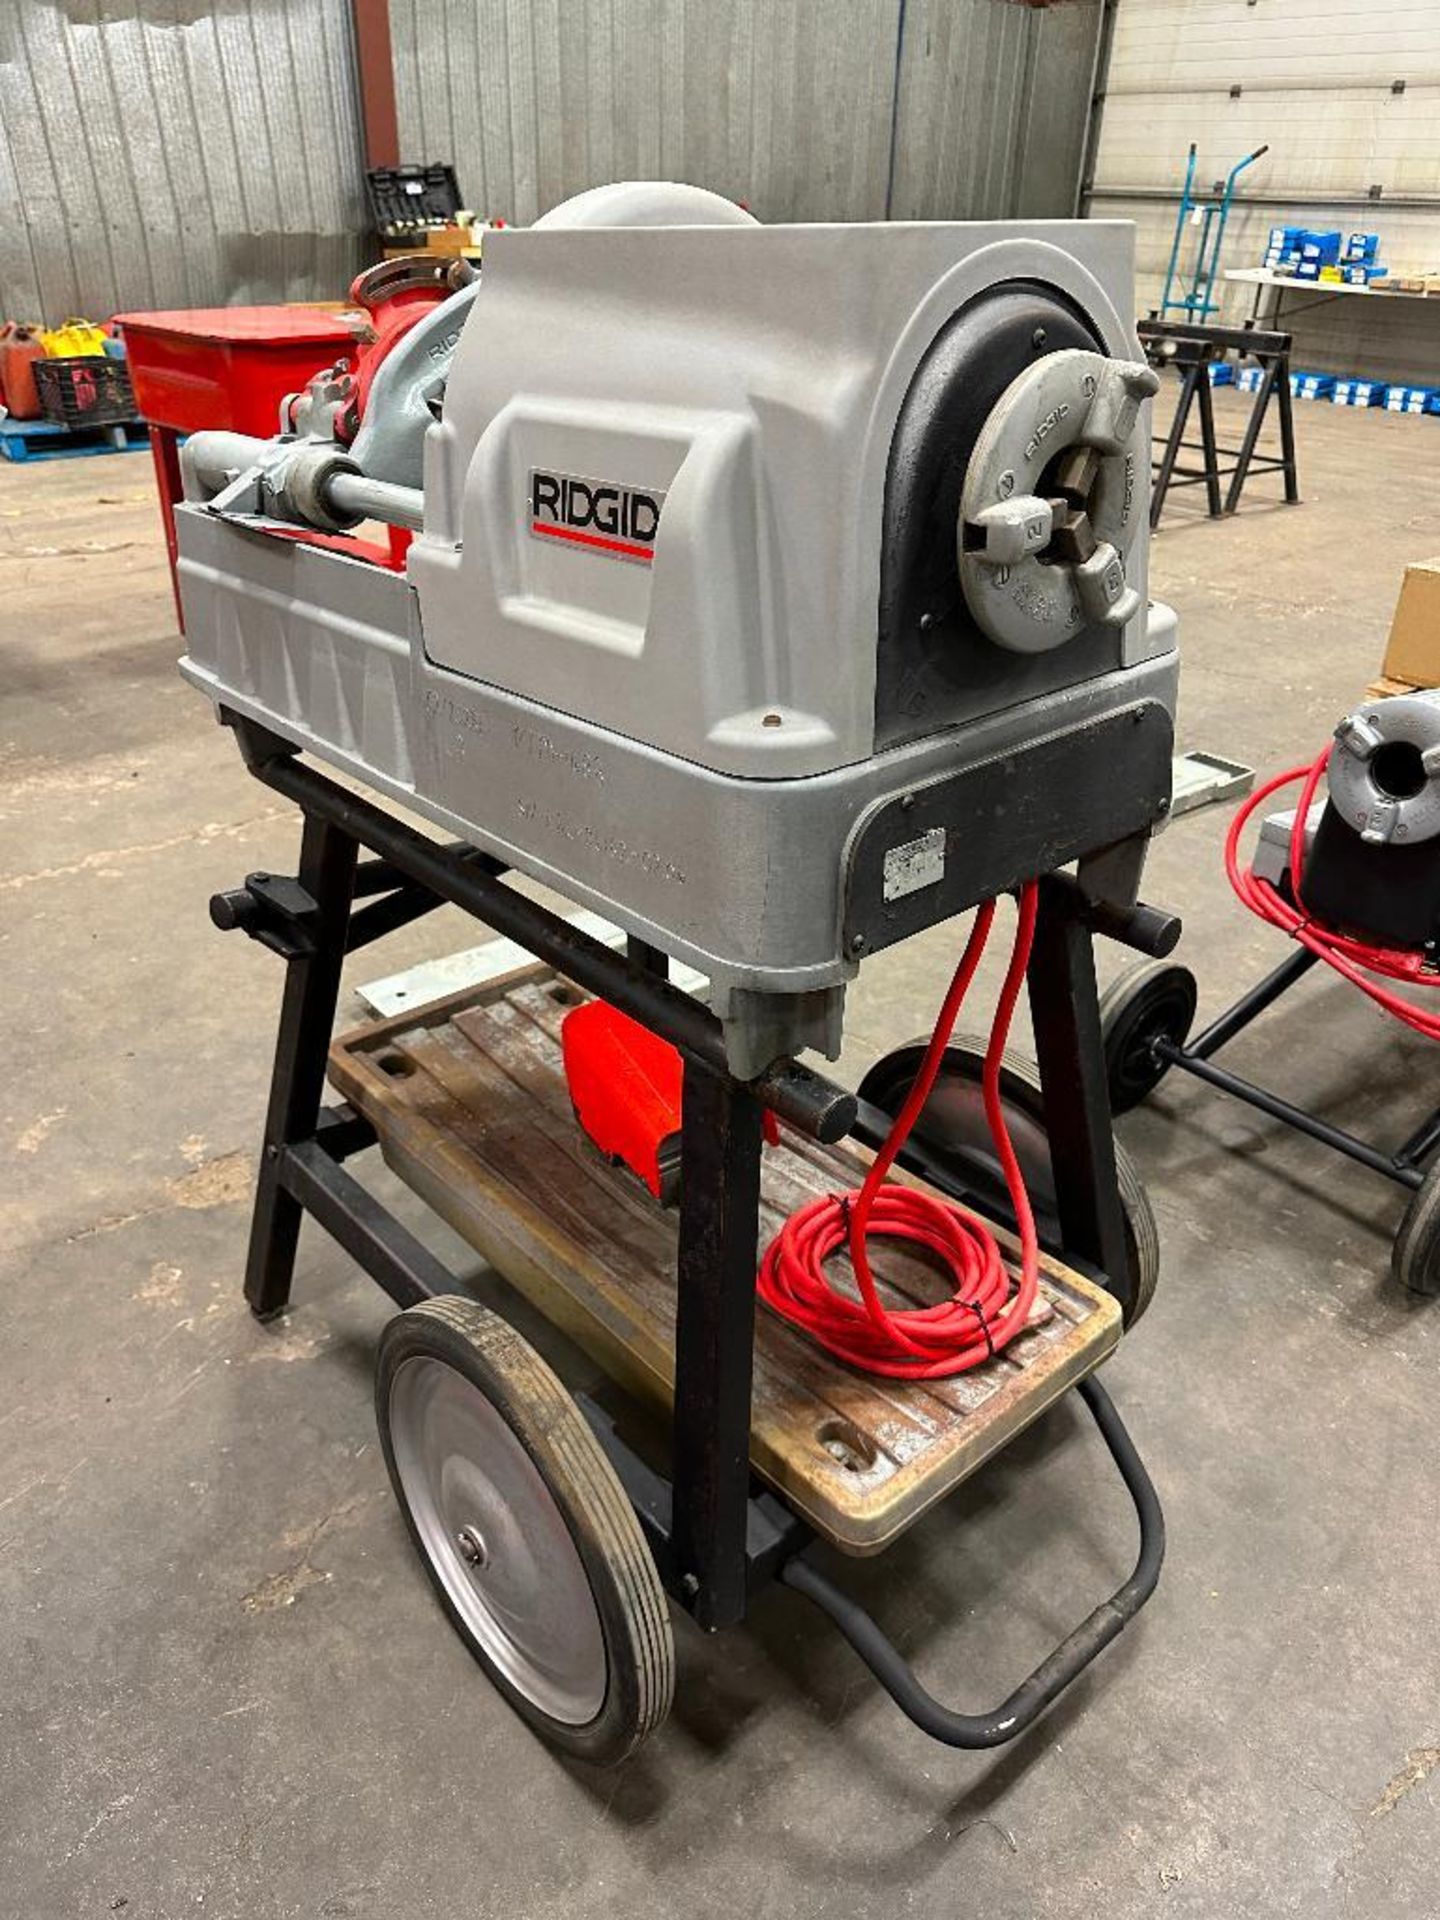 Ridgid 535 Manual Chuck Threader w/ Cutter, Reamer, Foot Pedal, Mobile Stand, Die Head, etc. - Image 6 of 9